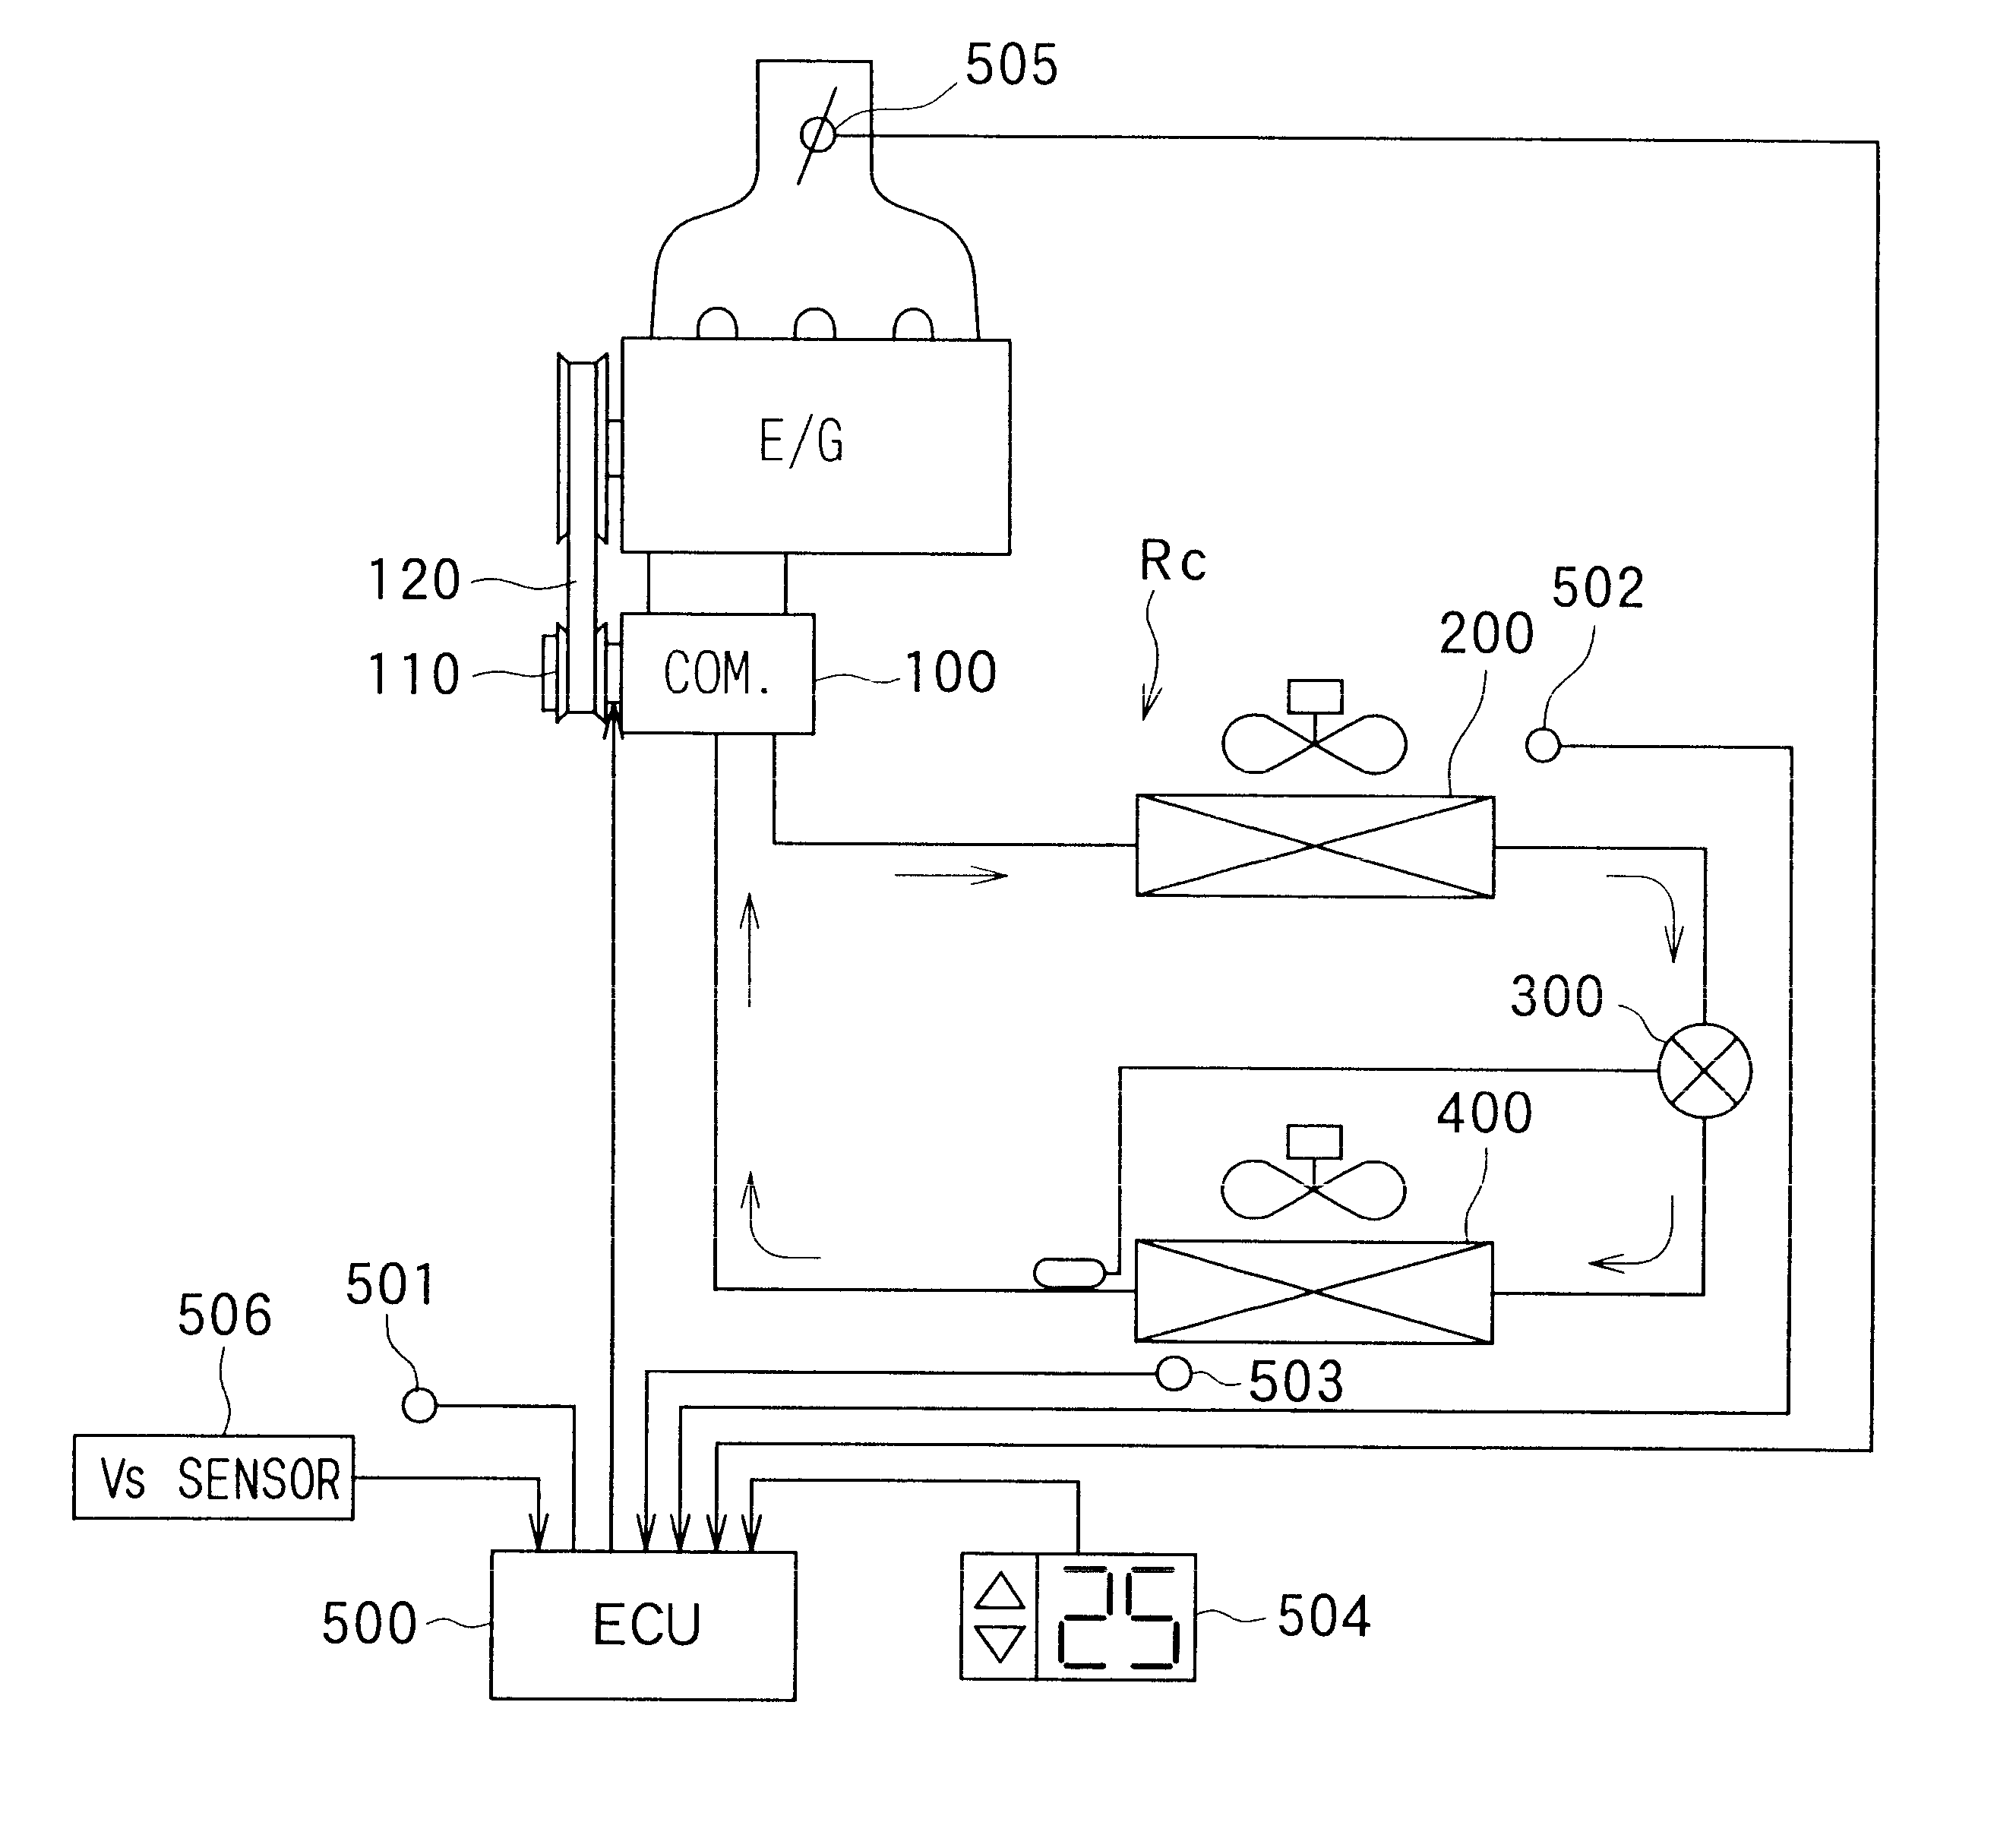 Vapor-compression refrigerant cycle for vehicle